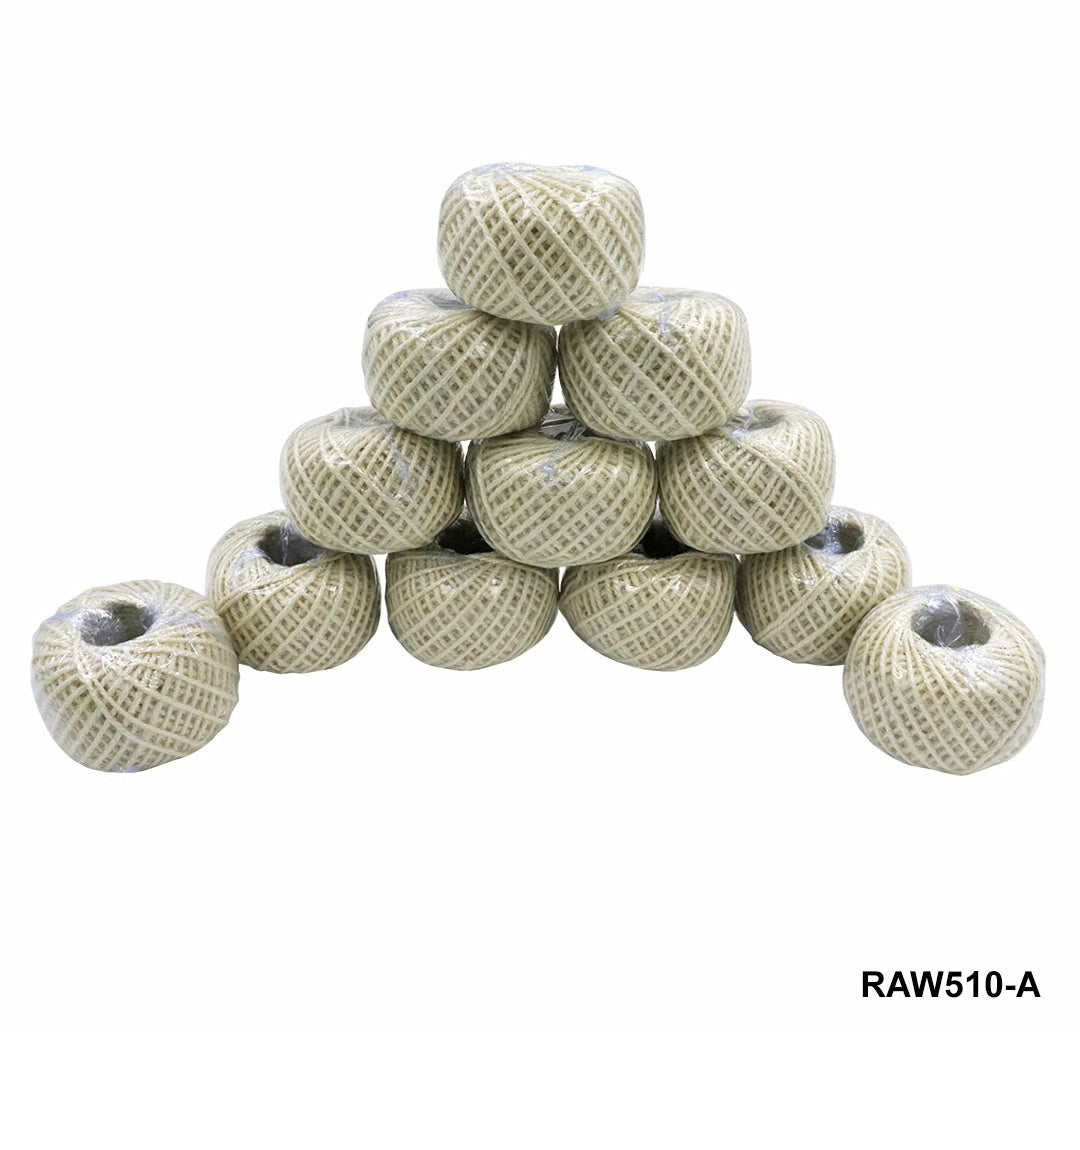 Jute Rope Off White 50Mtr Raw510-A | INKARTO